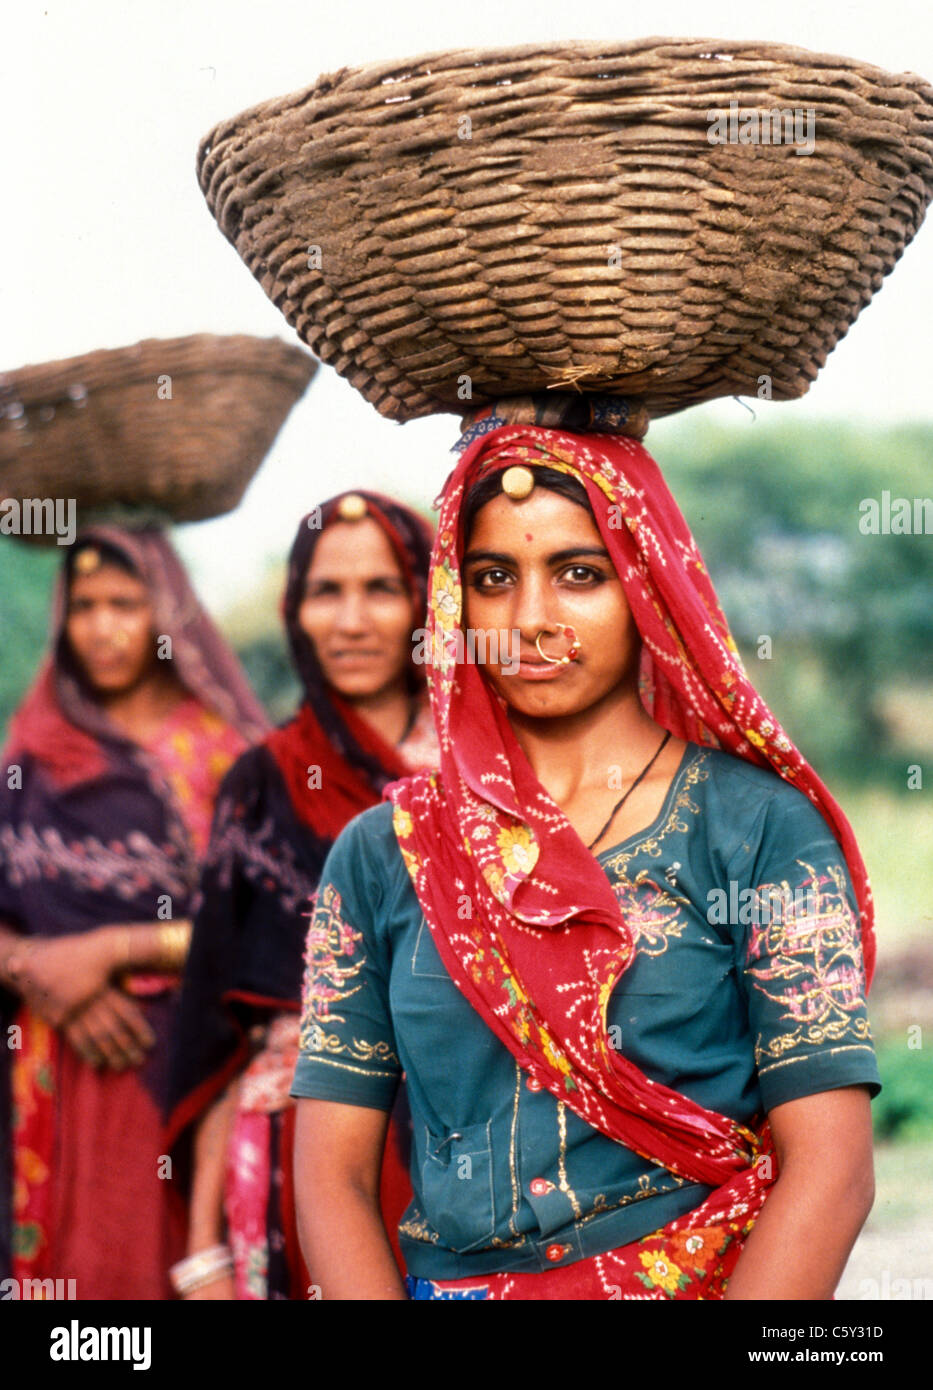 Three Hindu women workers with baskets of chillis on their heads Orissa state India now called Odisha, 1984 Stock Photo